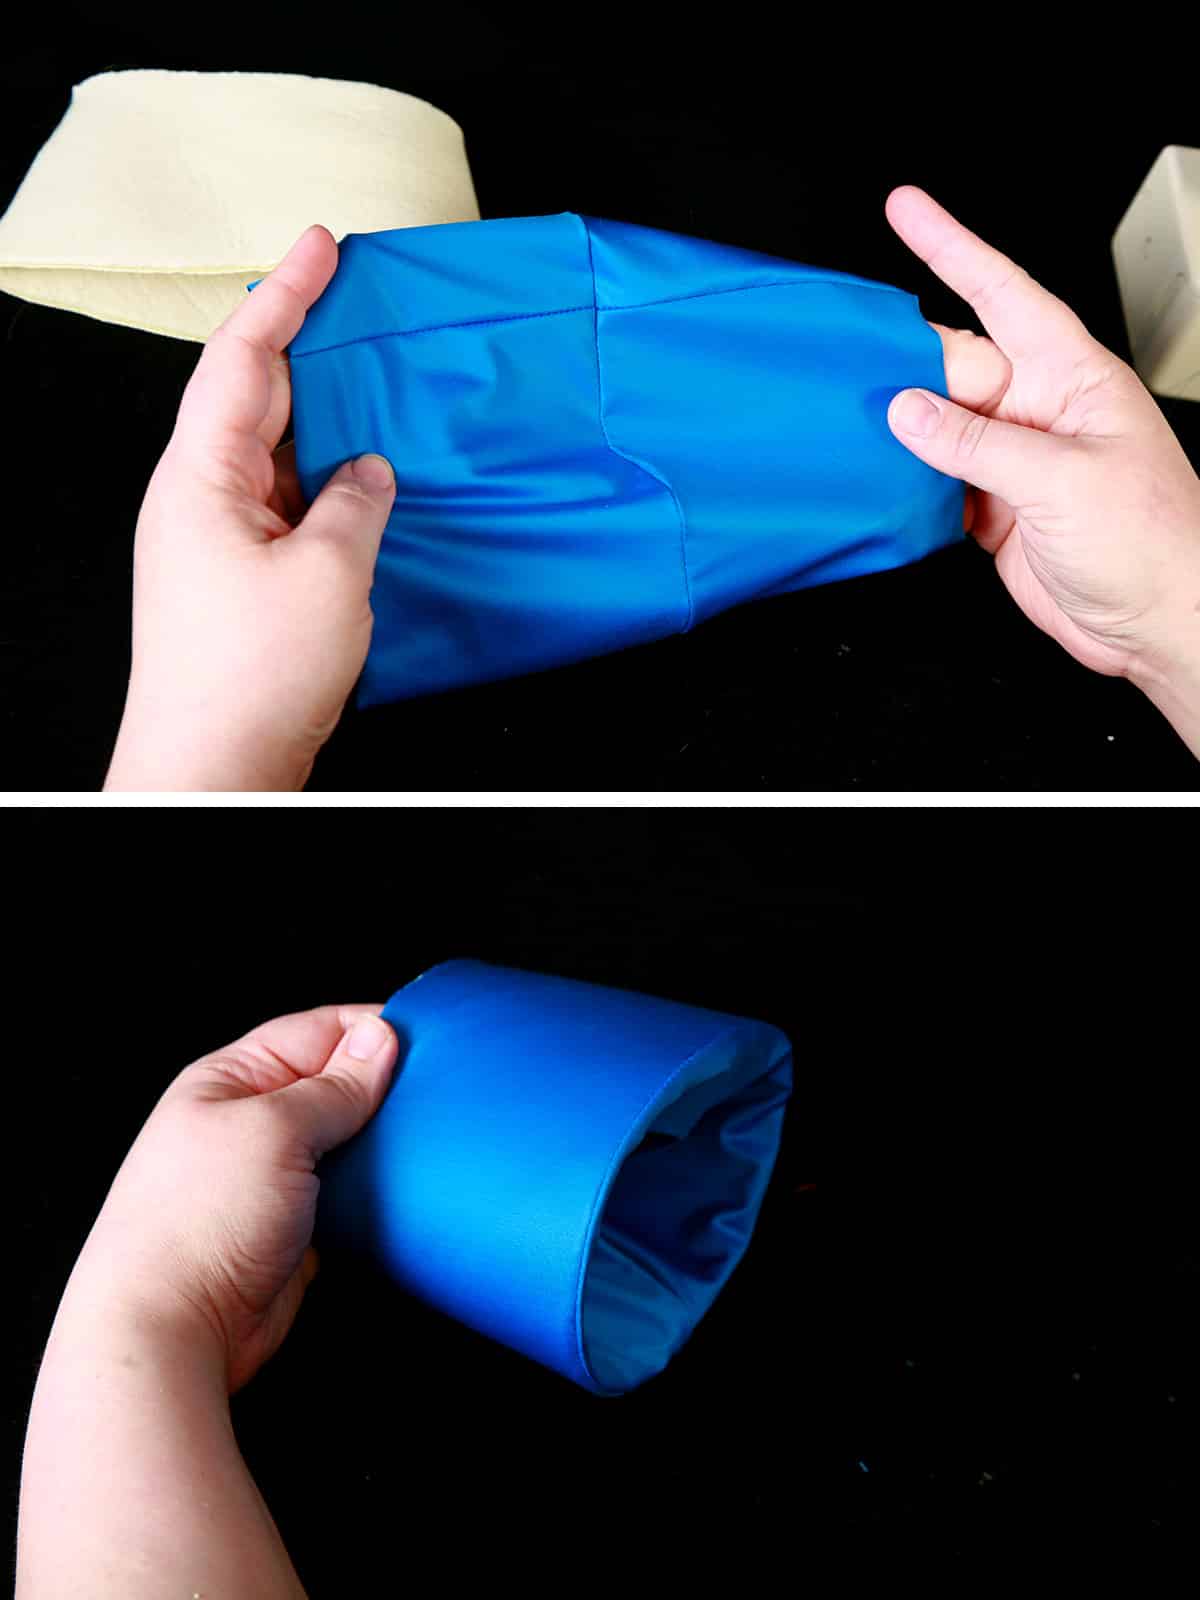 A two part compilation image showing two pieces of blue spandex being sewn to form a glove cuff.